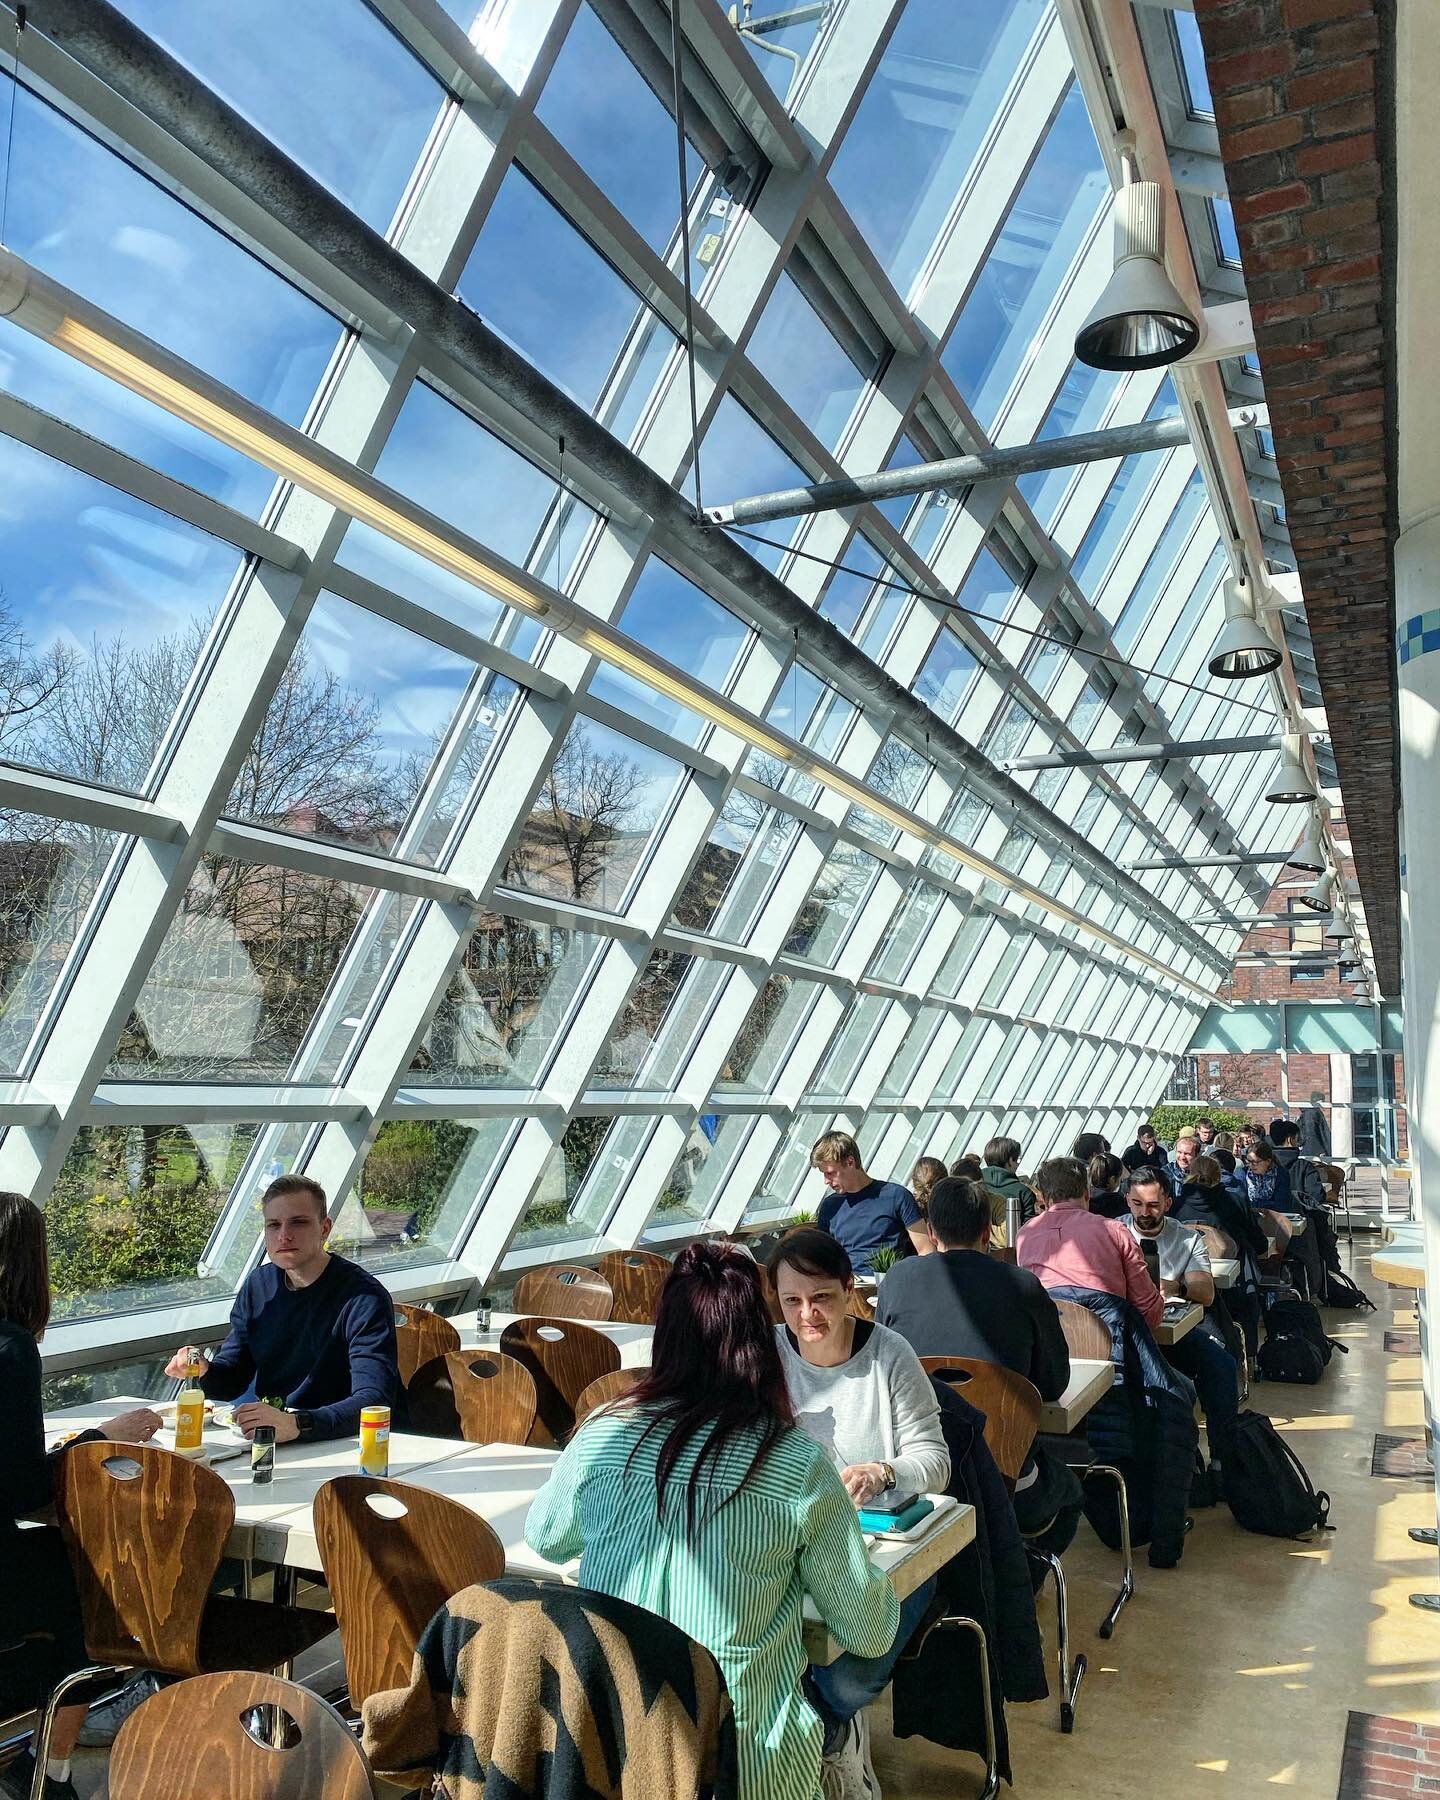 #GTIME students&rsquo; favorite spot in Mensa at @tuhamburg campus☀️😎 🥗

#lifestyle #diversity #international #tuhamburg #hamburg #germany #university